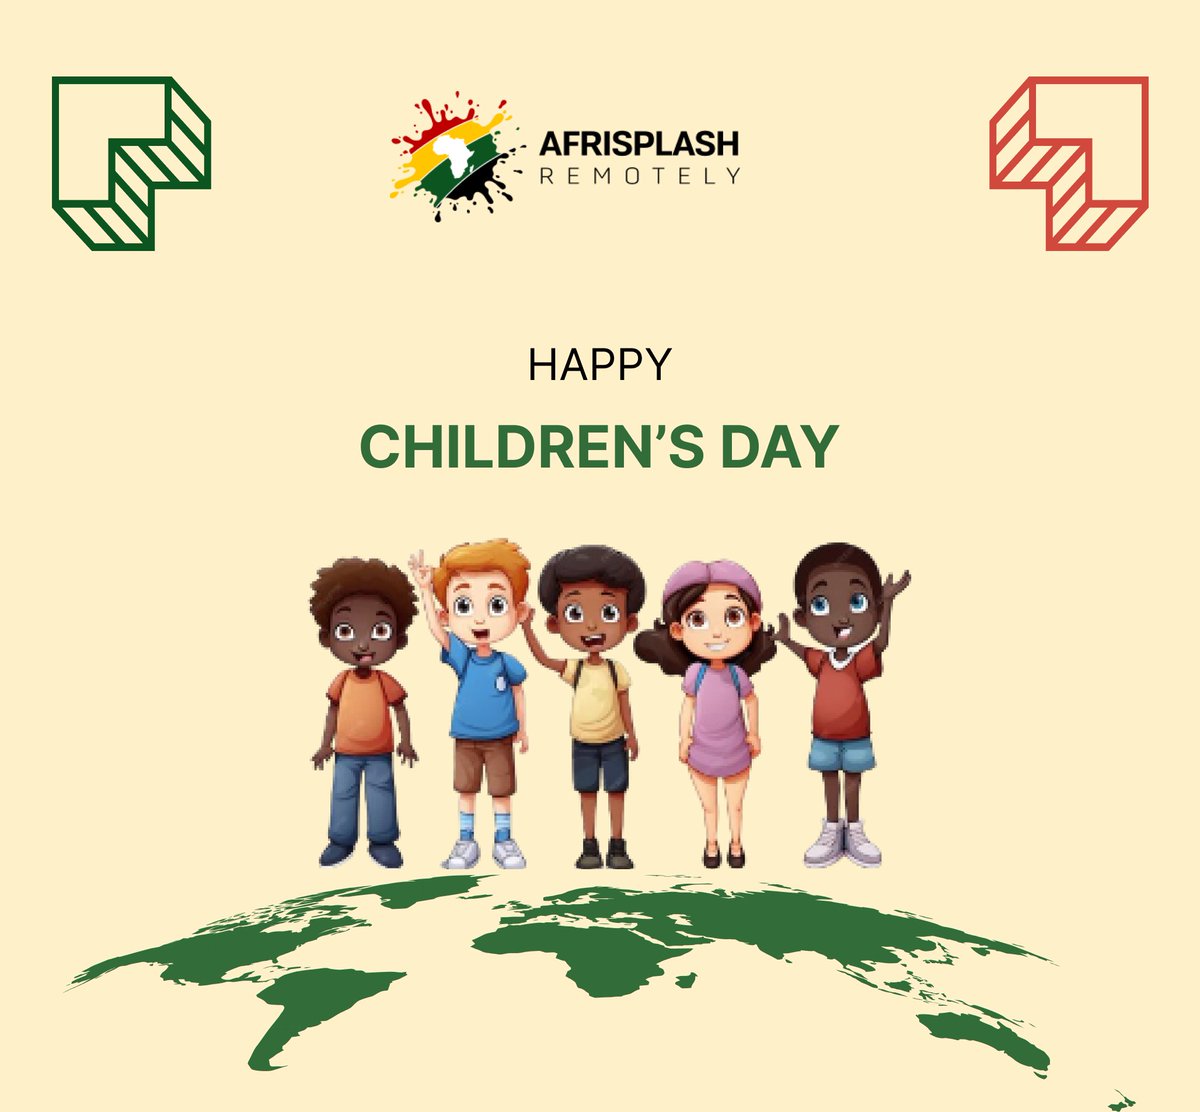 Happy Children's Day AfriSplash Fam—celebrating the bright young minds shaping the future of tech worldwide!
#ChildrensDay #FutureTechLeaders #AfriSplash